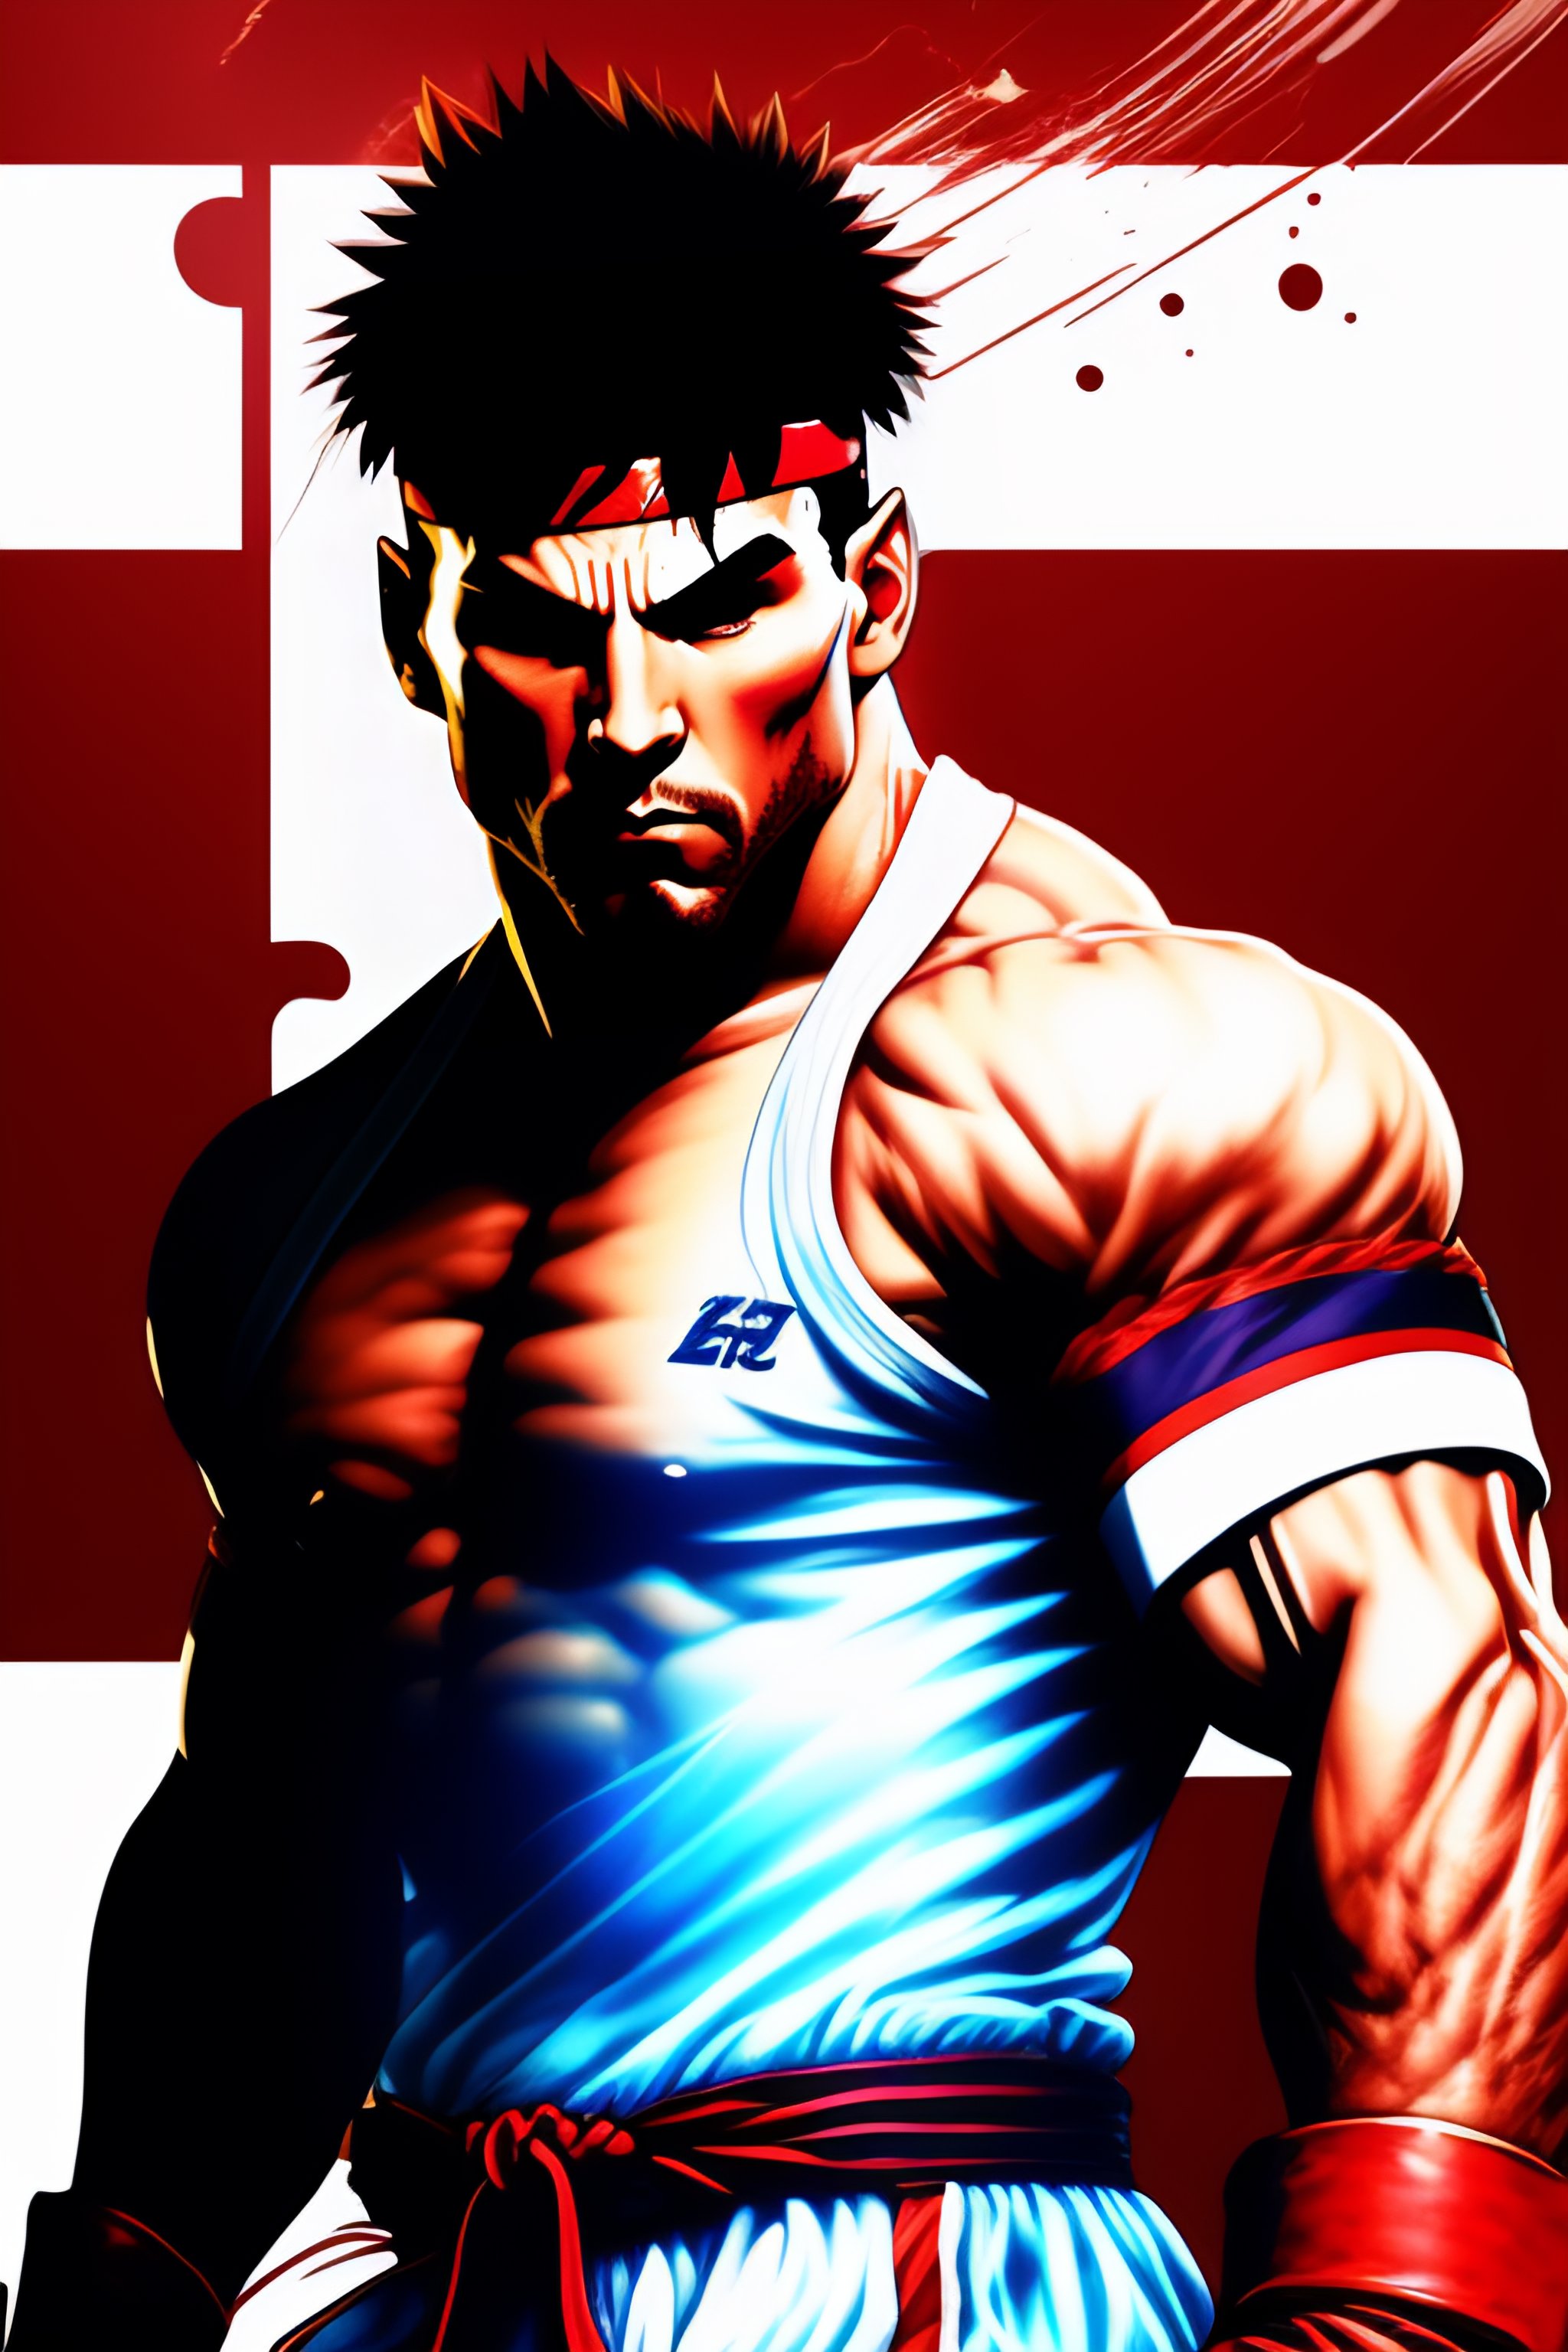 Lexica - Anime of Messi as Street Fighter Ryu holding hadouken